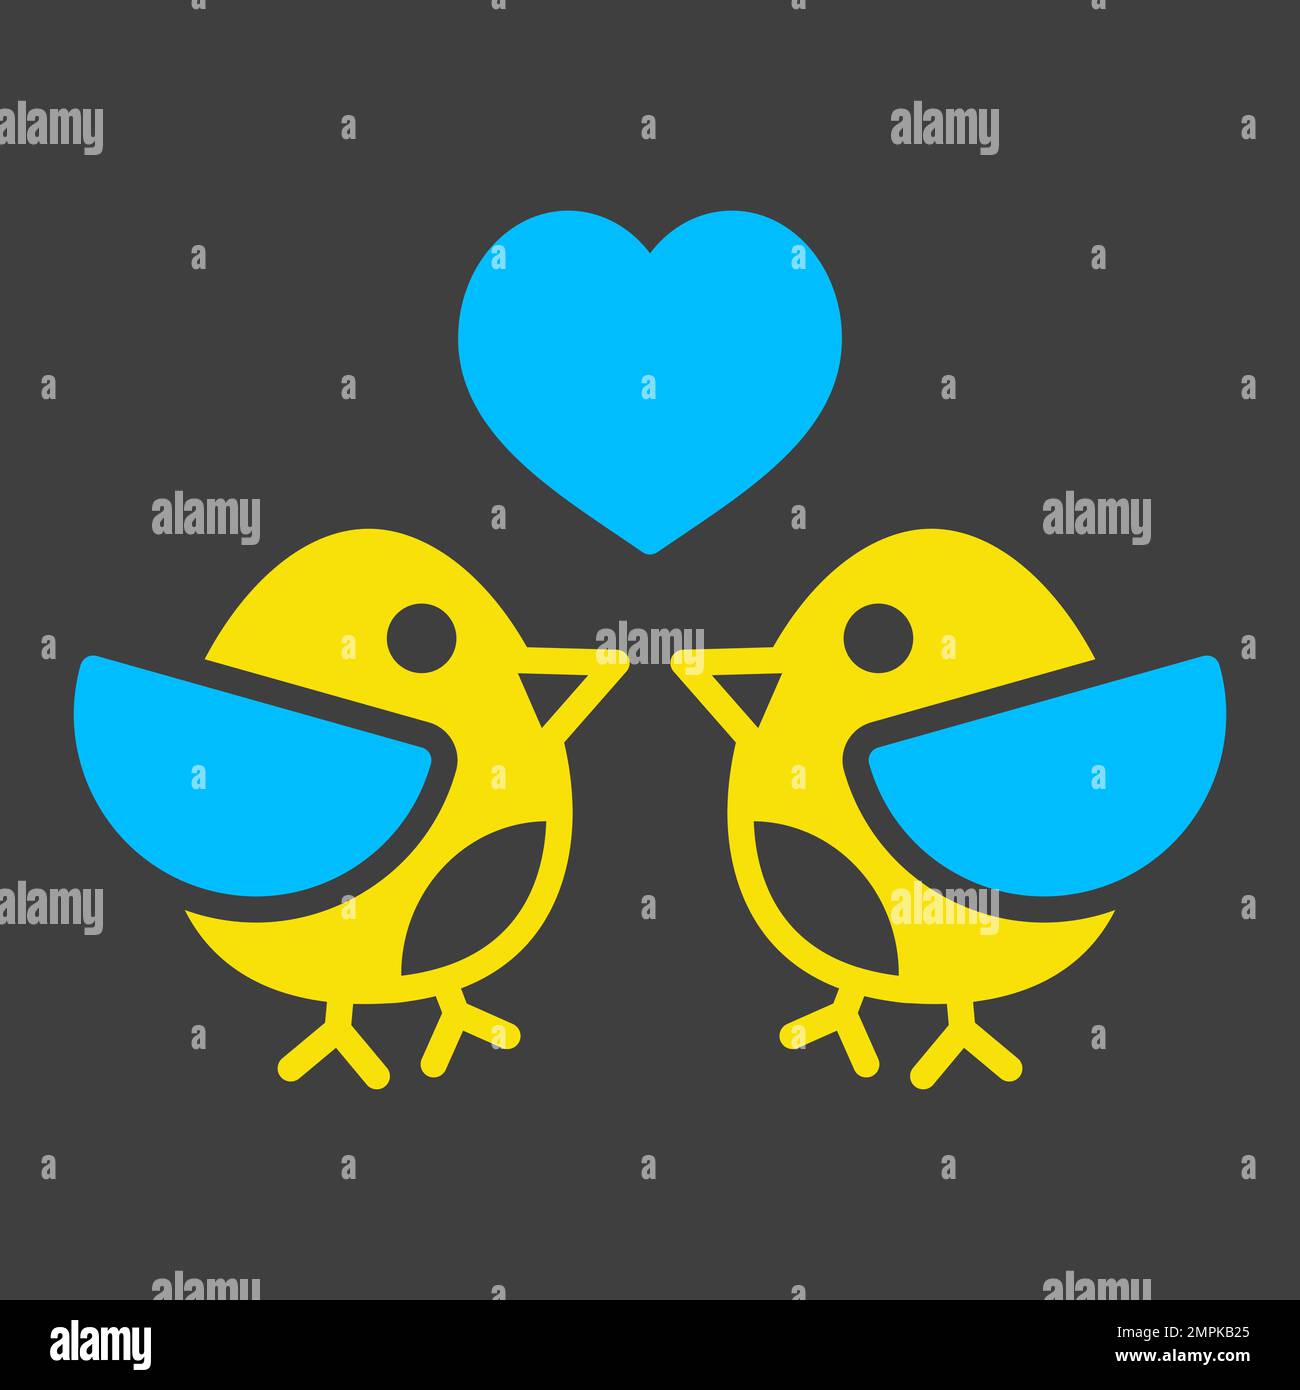 Love birds glyph on dark background icon. Couple in love symbol. Valentine day. Vector illustration, romance elements. Sticker, patch, badge, card for Stock Vector